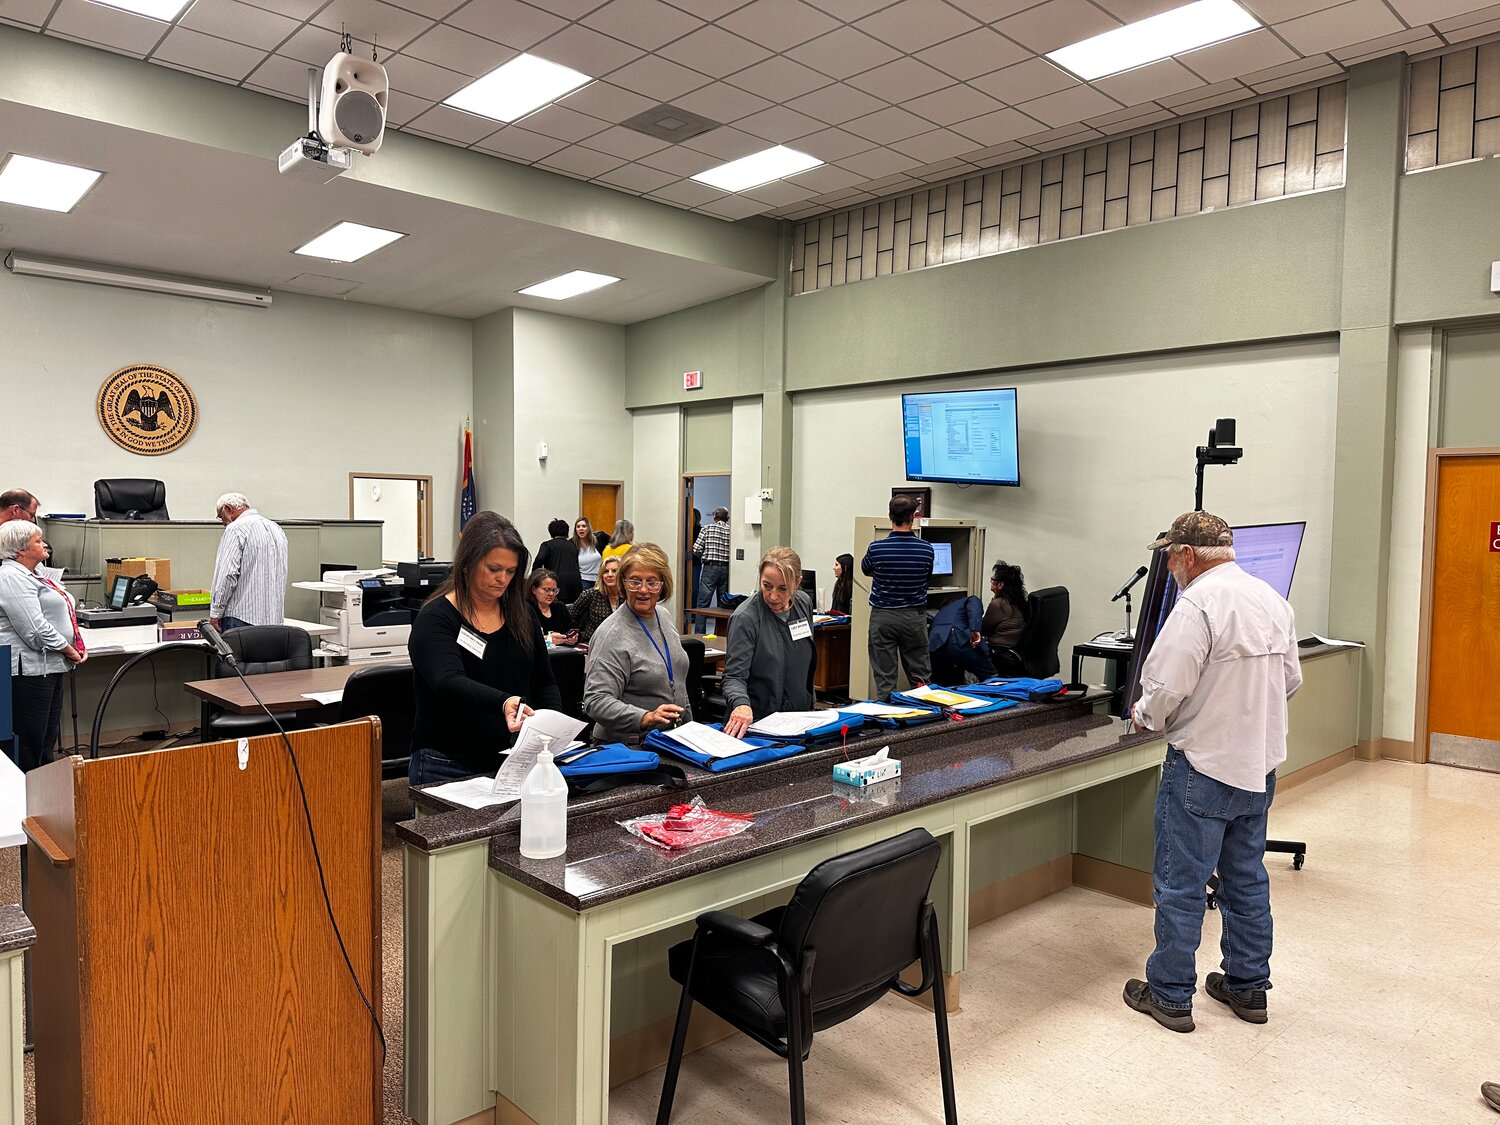 The Tishomingo County Courthouse was Very Active the Night of November 7th. Pictured Here, Josh McNatt and His Team as well as the Election Commission and Volunteers were Hard at Work Reporting the Results